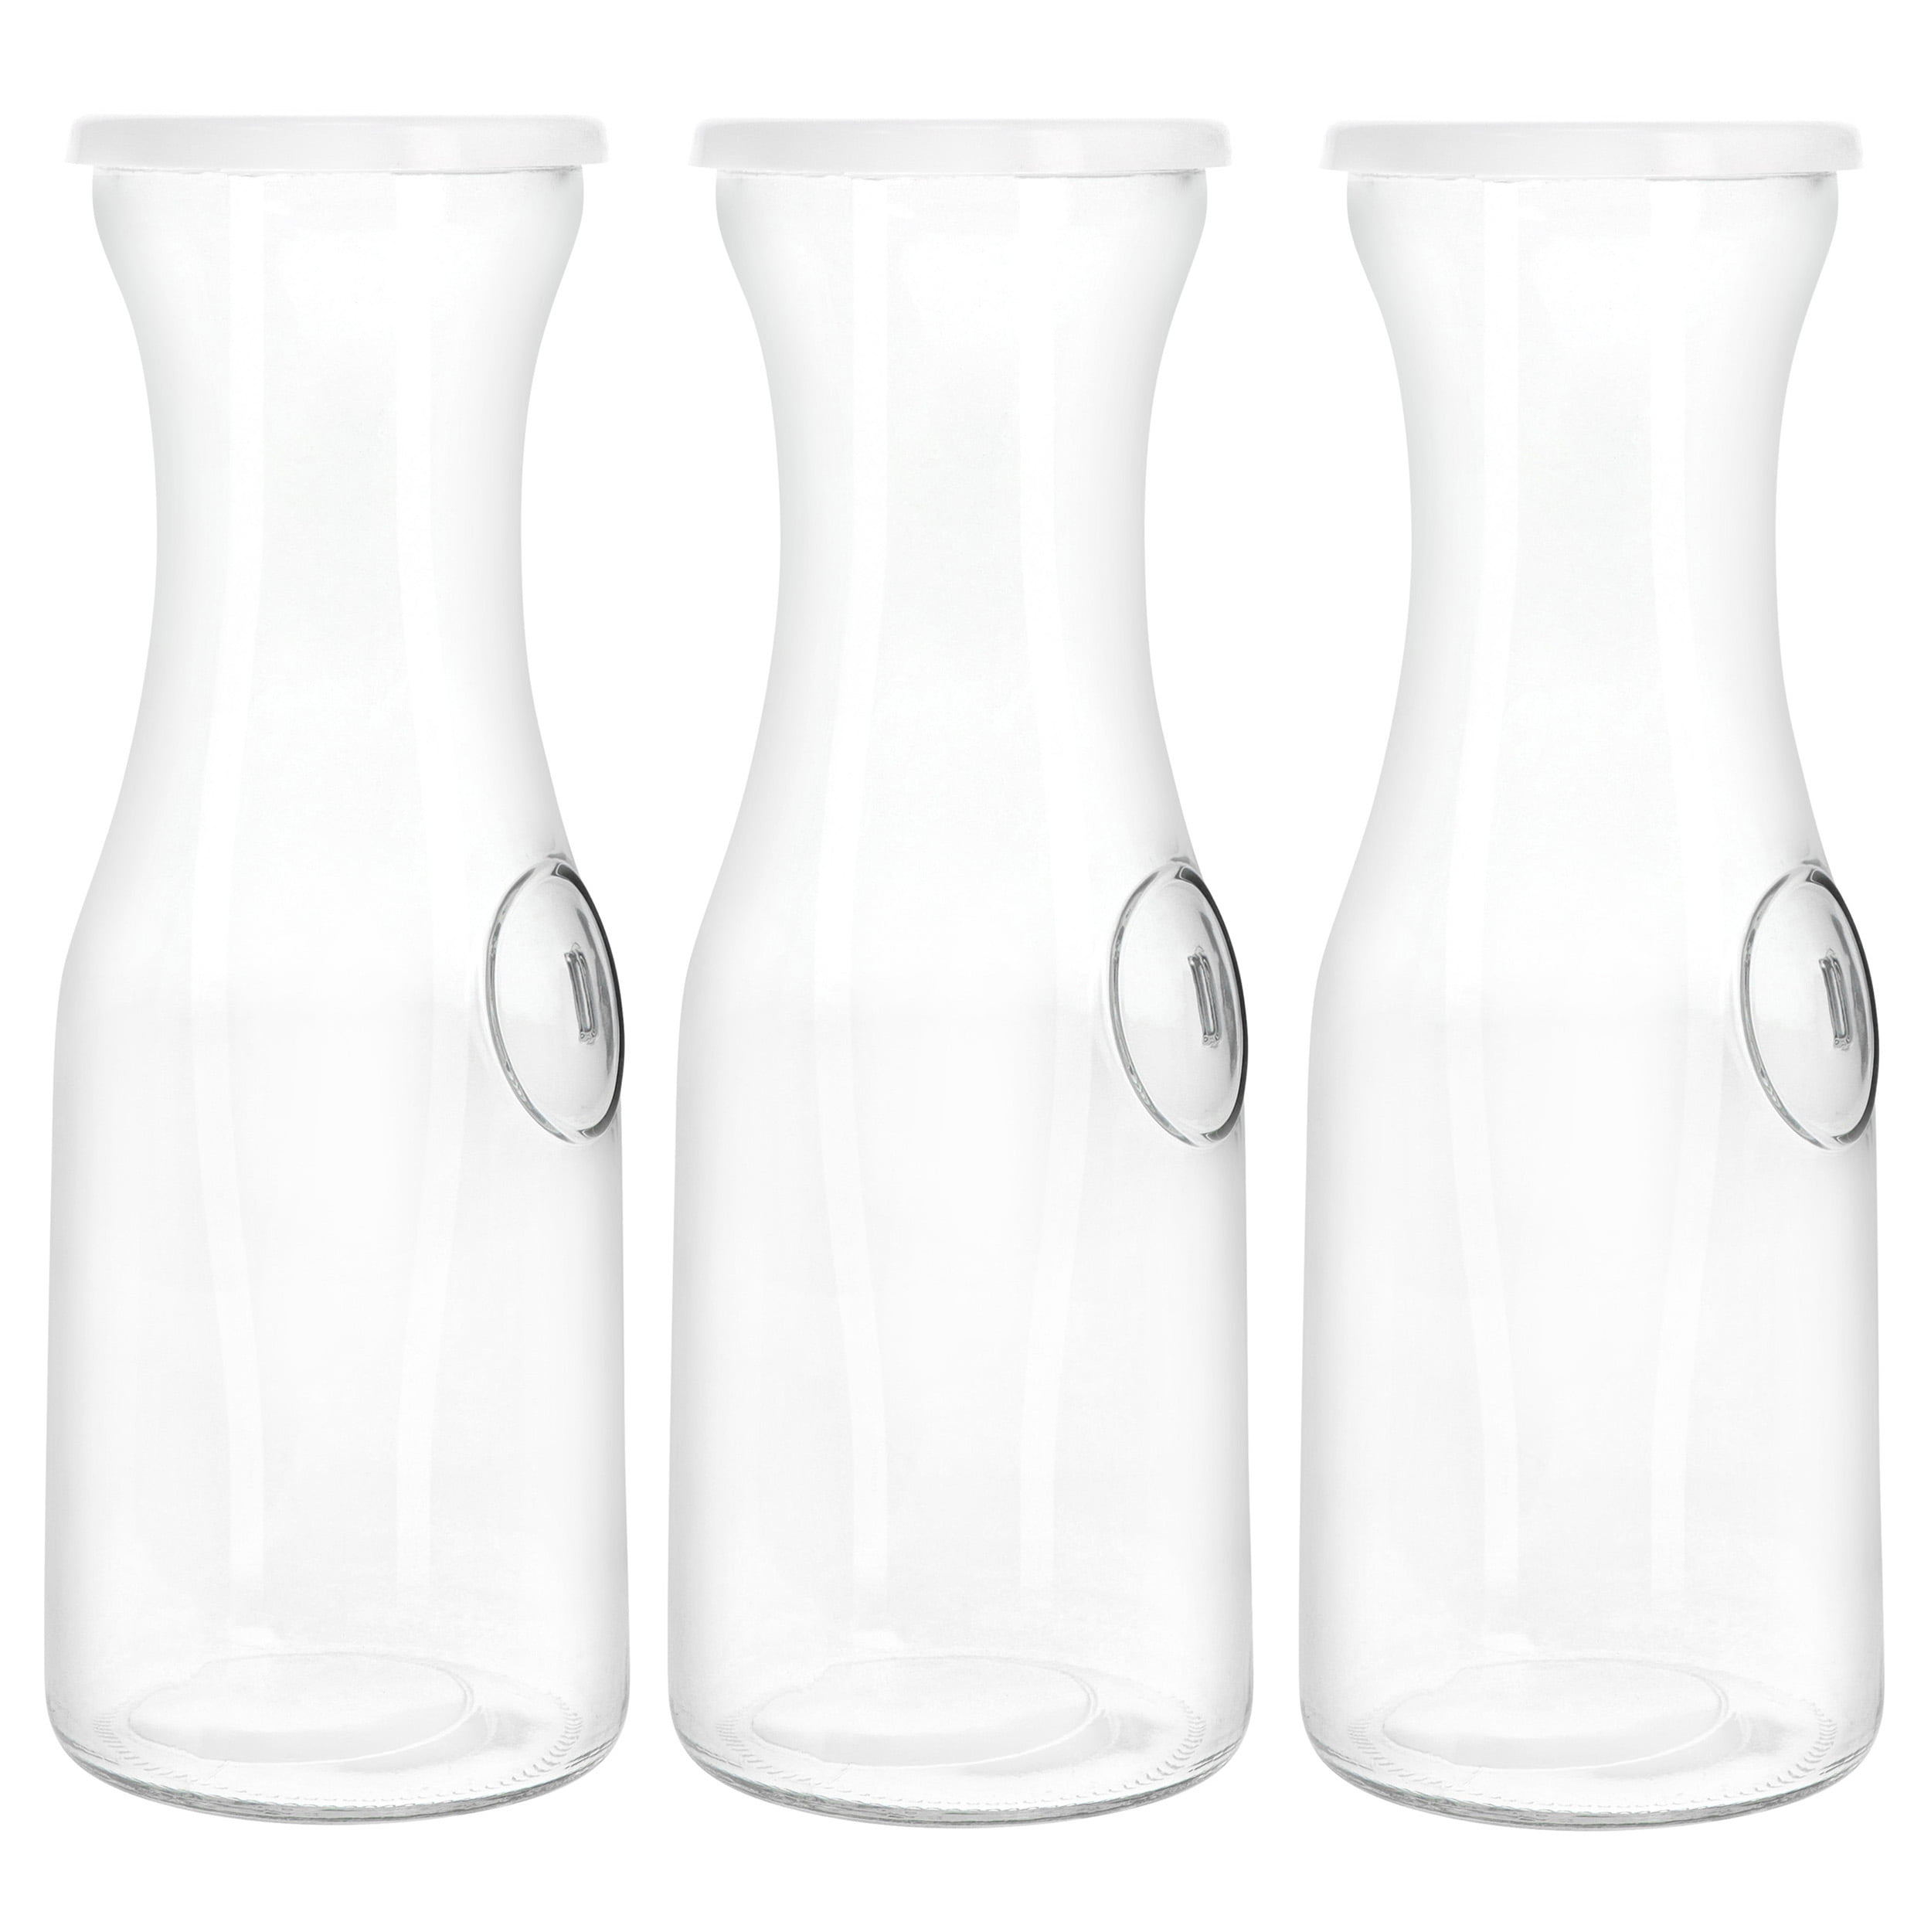 Set Of 4 Glass Carafes & Pitchers For Mimosa Bar Supplies, 1 Liter Beverage  Glass Carafe With Lids For Wine,Brunch,Champagne,Lemonade,Milk,Iced